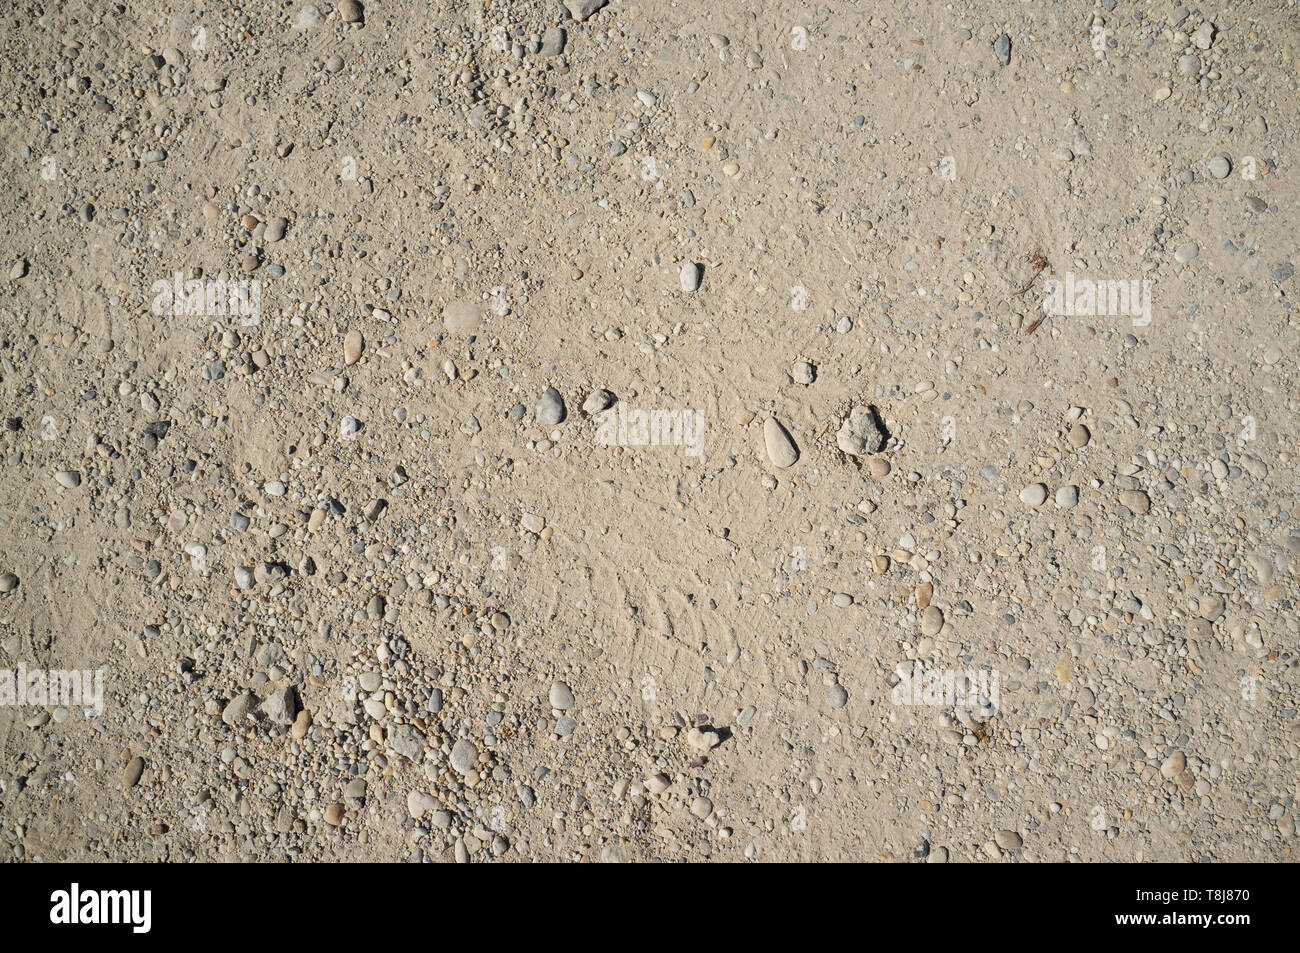 Dusty Road with Small Rocks, Dirt, Footprints, Car and Bicycle Traces Stock Photo